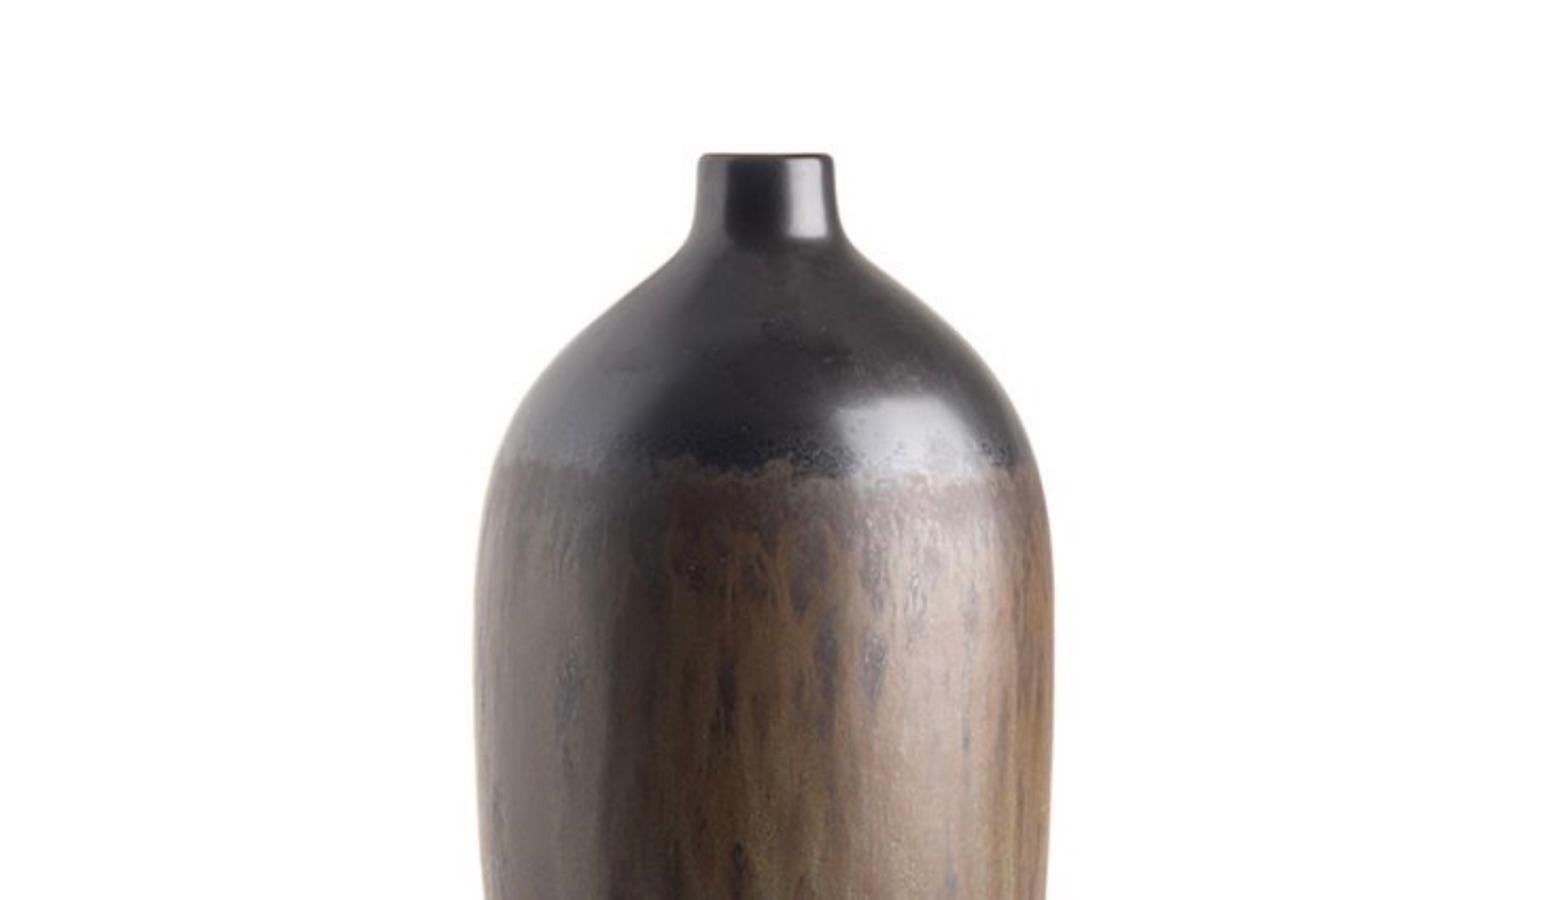 Contemporary Chinese tall ceramic Classic shape vase.
Decorative gold streak glaze with dark brown and black top and base.
